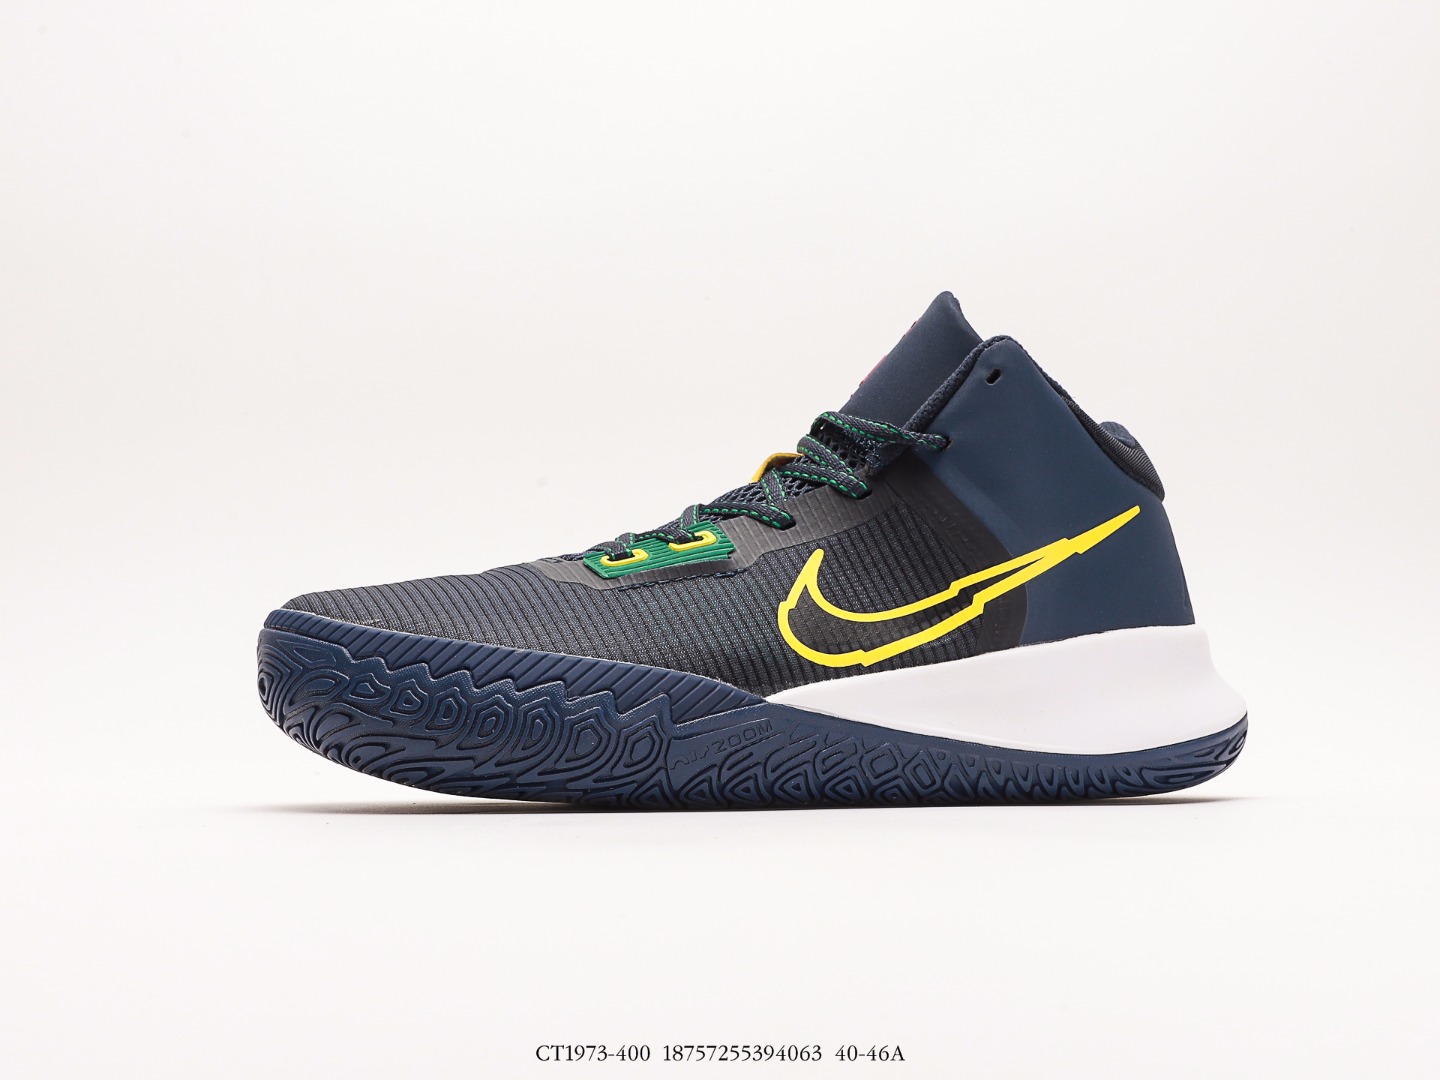 Volano Nike Kyrie 4 Blue Void Yellow_CT1973-400